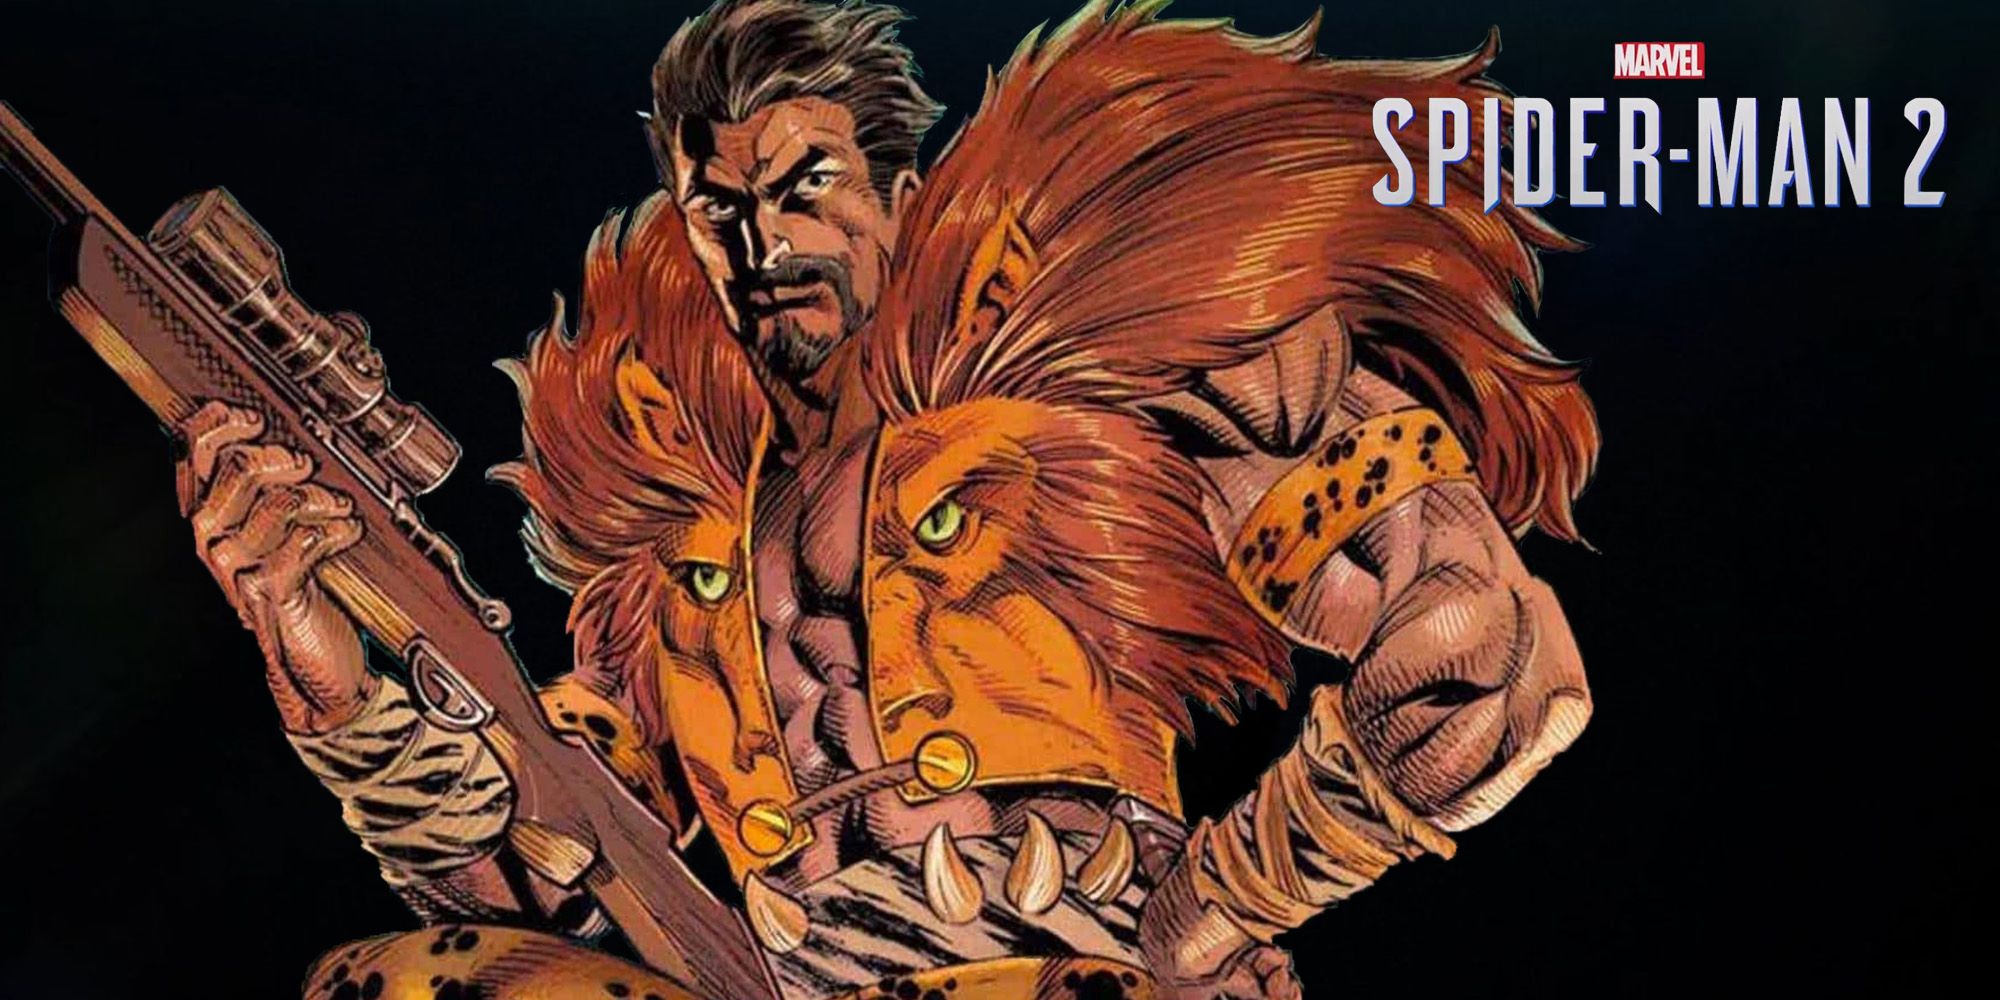 Kraven the Hunter holding a rifle. Spider-Man 2 logo in tip right of image. 